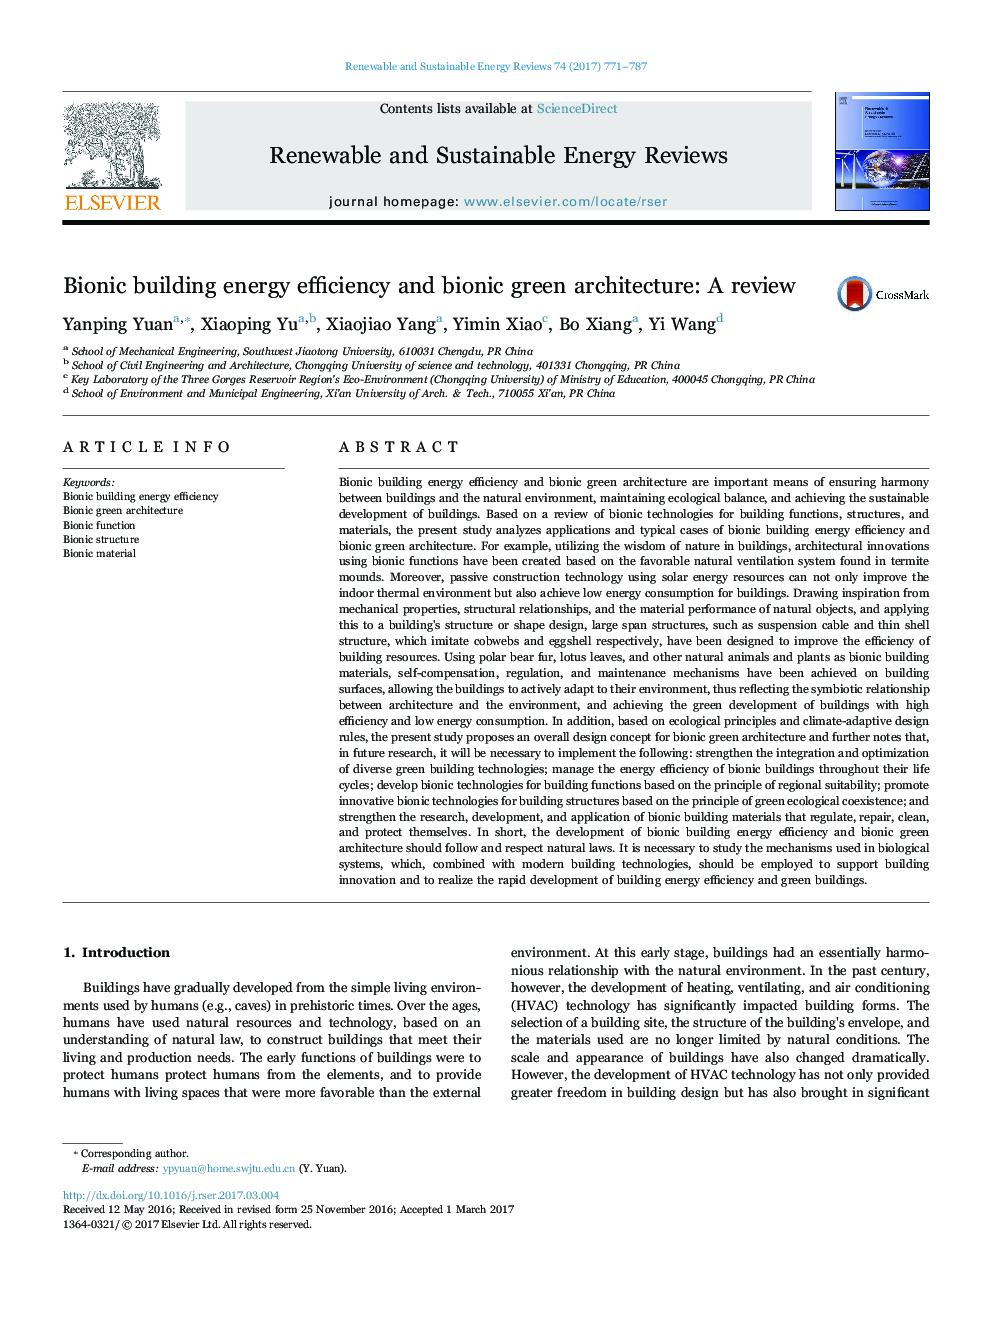 Bionic building energy efficiency and bionic green architecture: A review